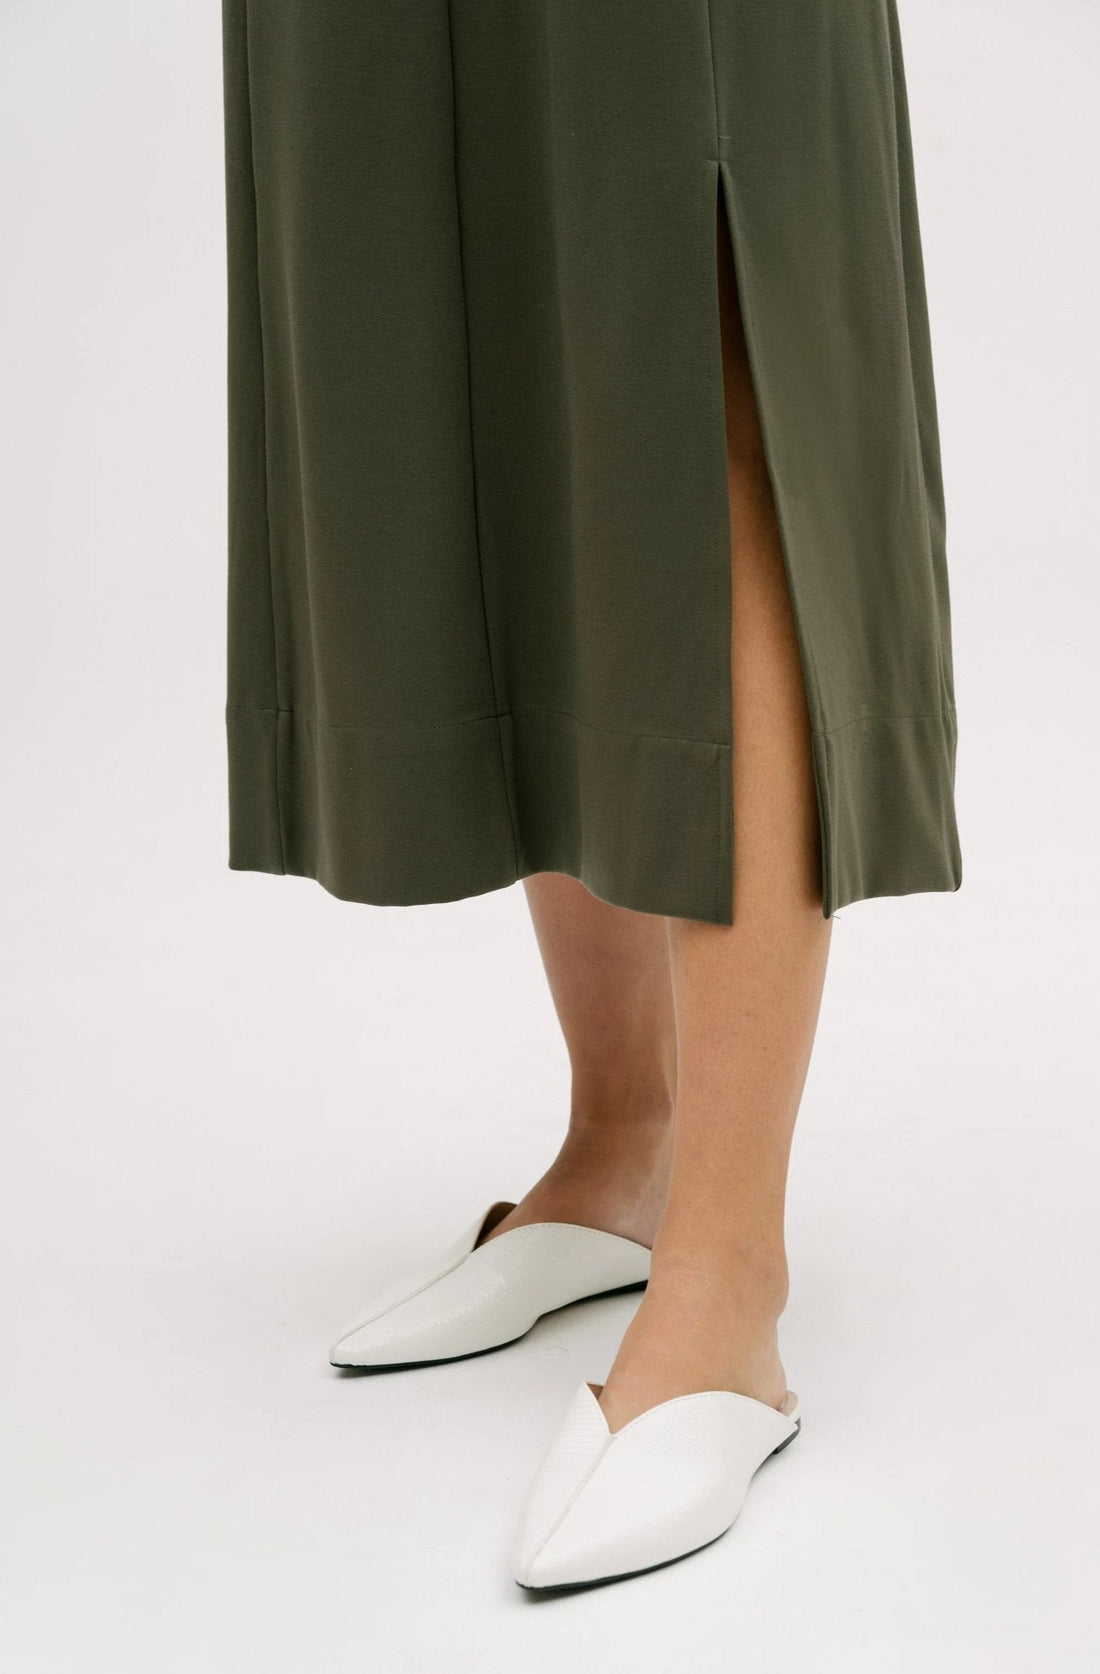 A woman wearing a dusty olive dress. She is also wearing white shoes.